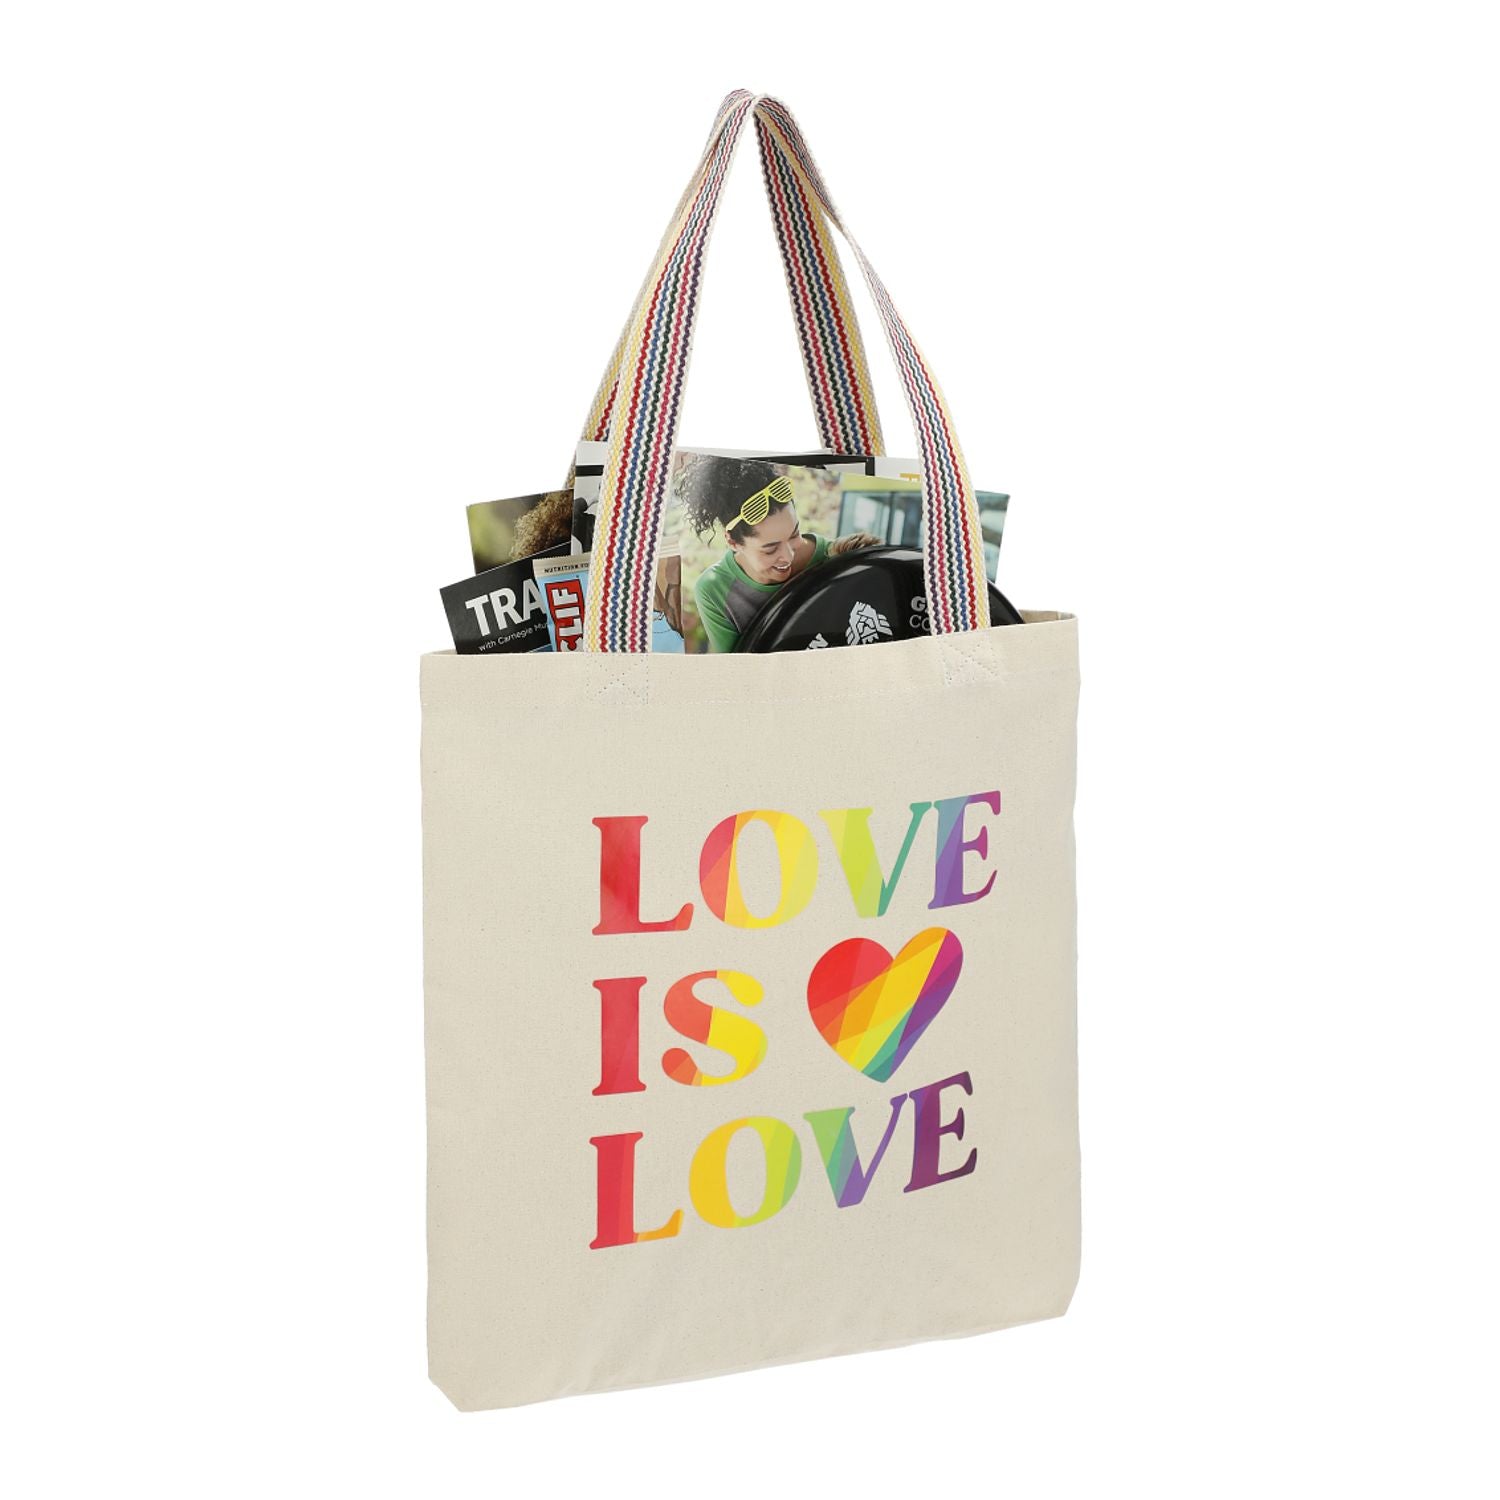 Customized recycled cotton rainbow bag with logo.